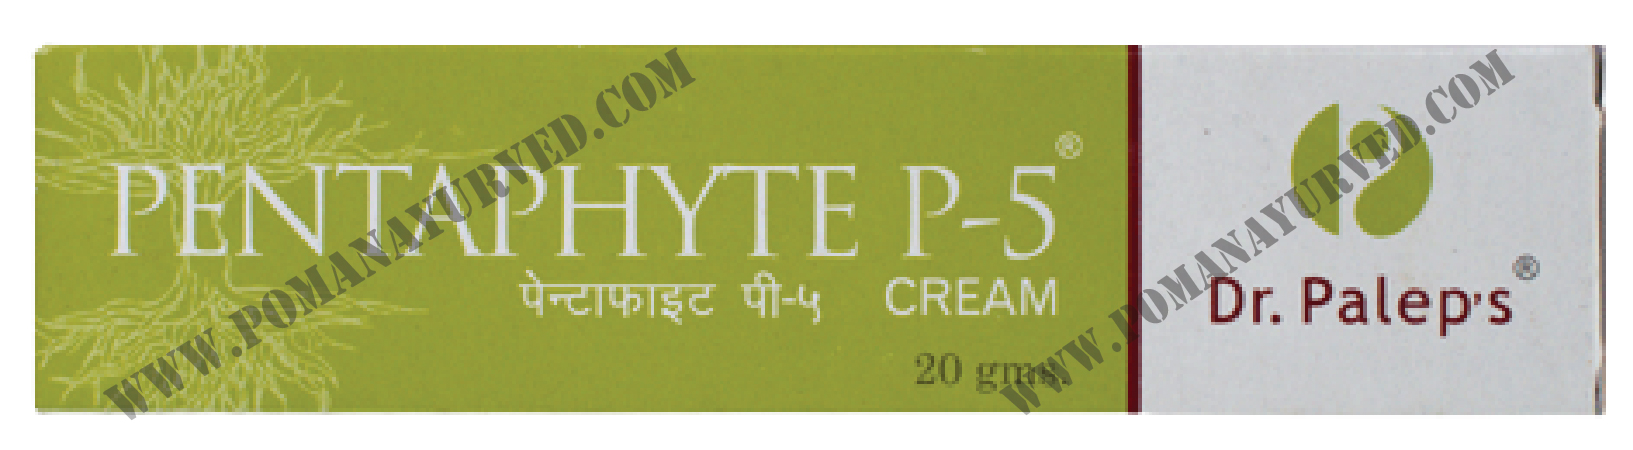 Picture of Pentaphyte P-5 Cream